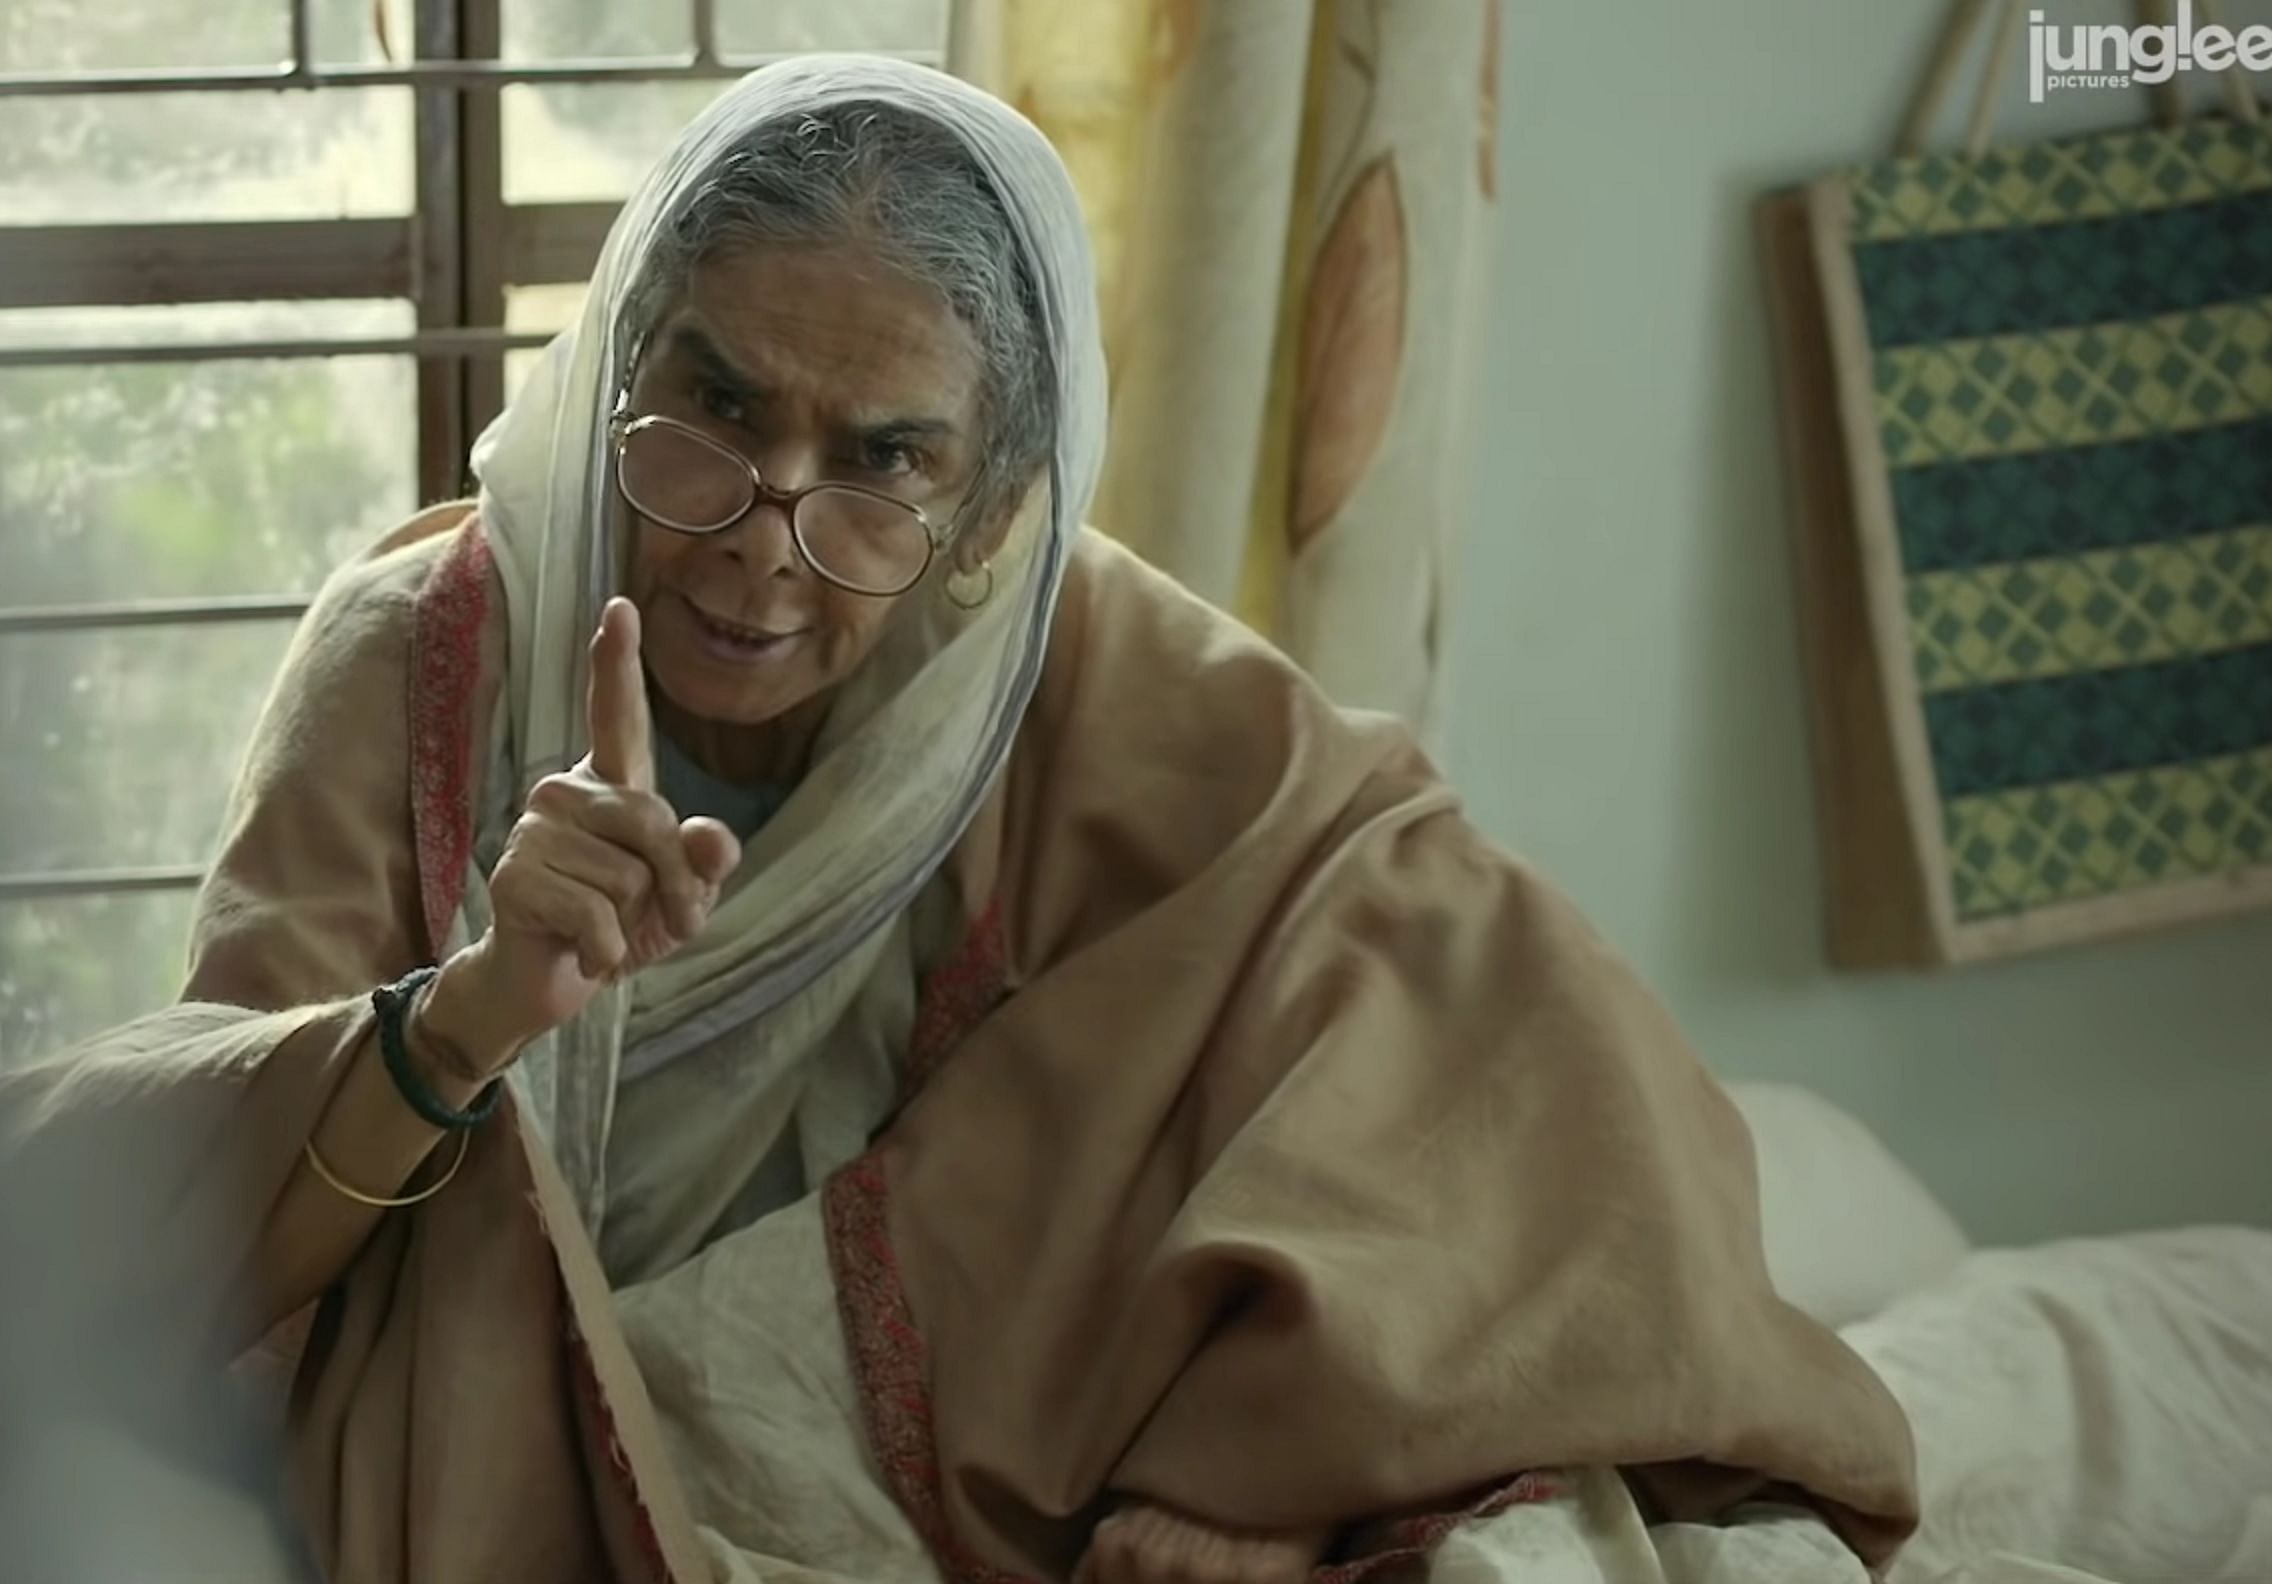 Surekha Sikri won the National Award in the Best Supporting Actor category for her performance in Badhaai Ho (2018).